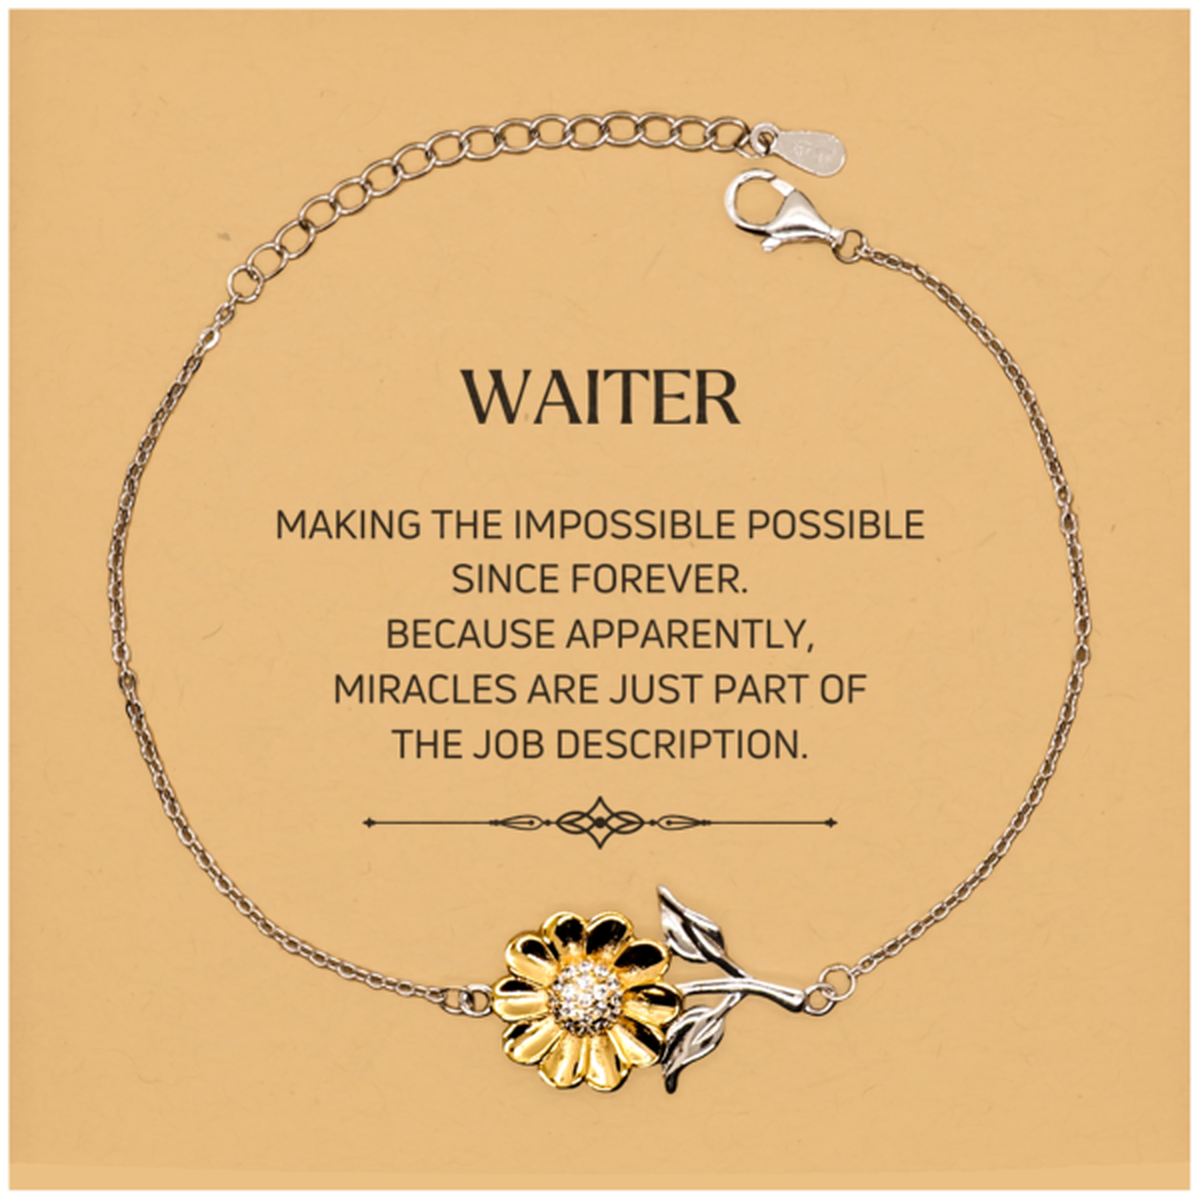 Funny Waiter Gifts, Miracles are just part of the job description, Inspirational Birthday Christmas Sunflower Bracelet For Waiter, Men, Women, Coworkers, Friends, Boss